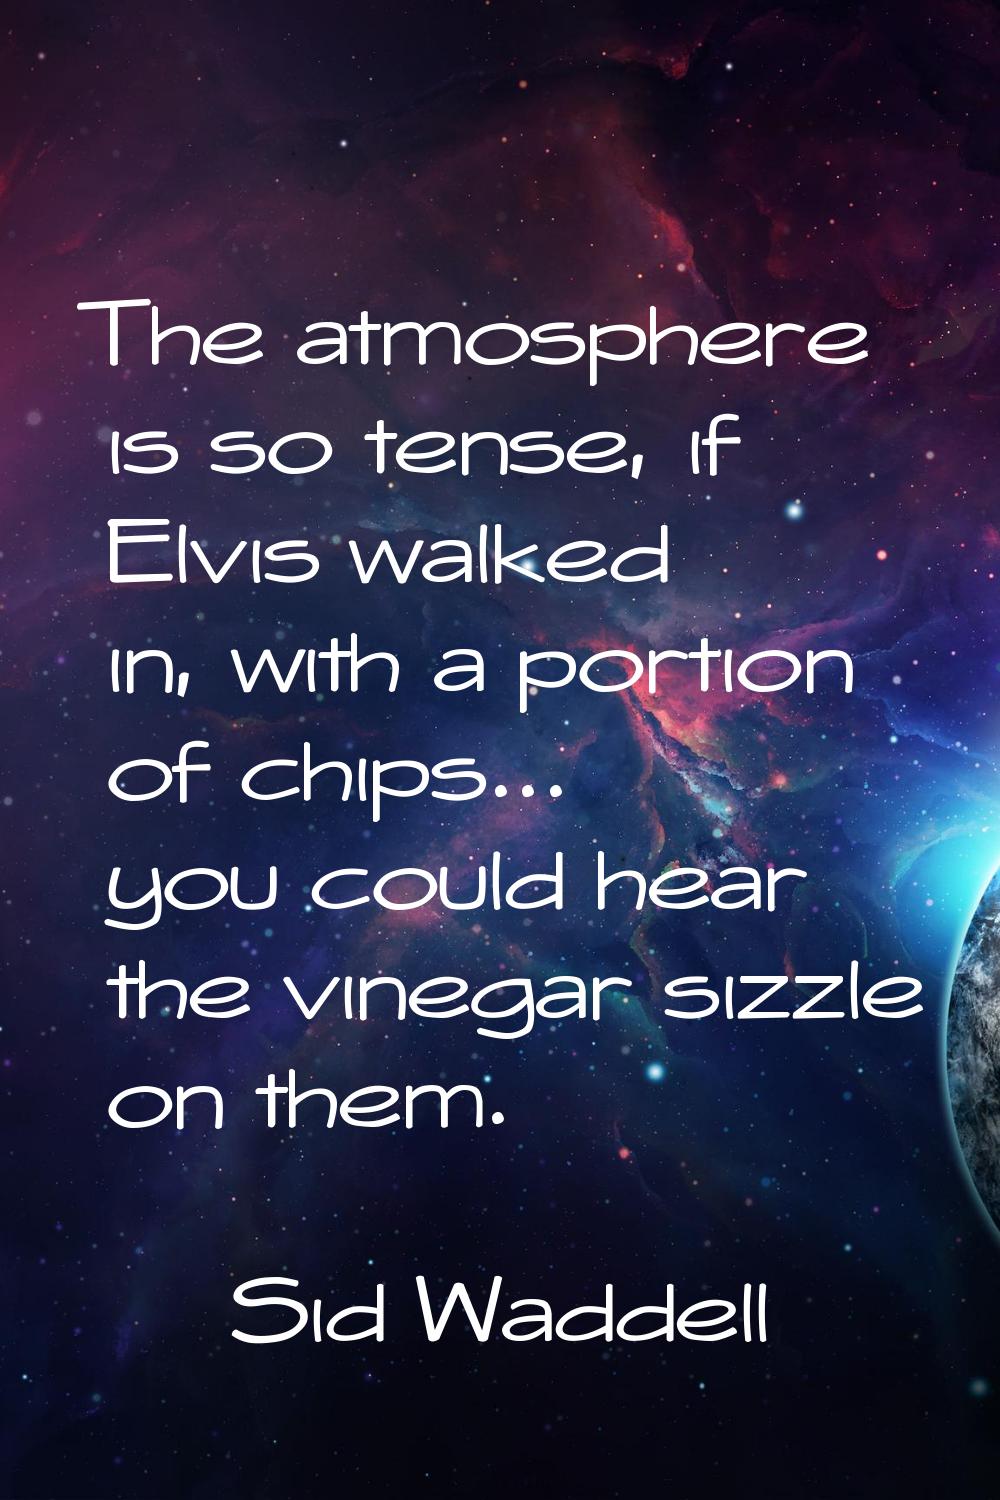 The atmosphere is so tense, if Elvis walked in, with a portion of chips... you could hear the vineg